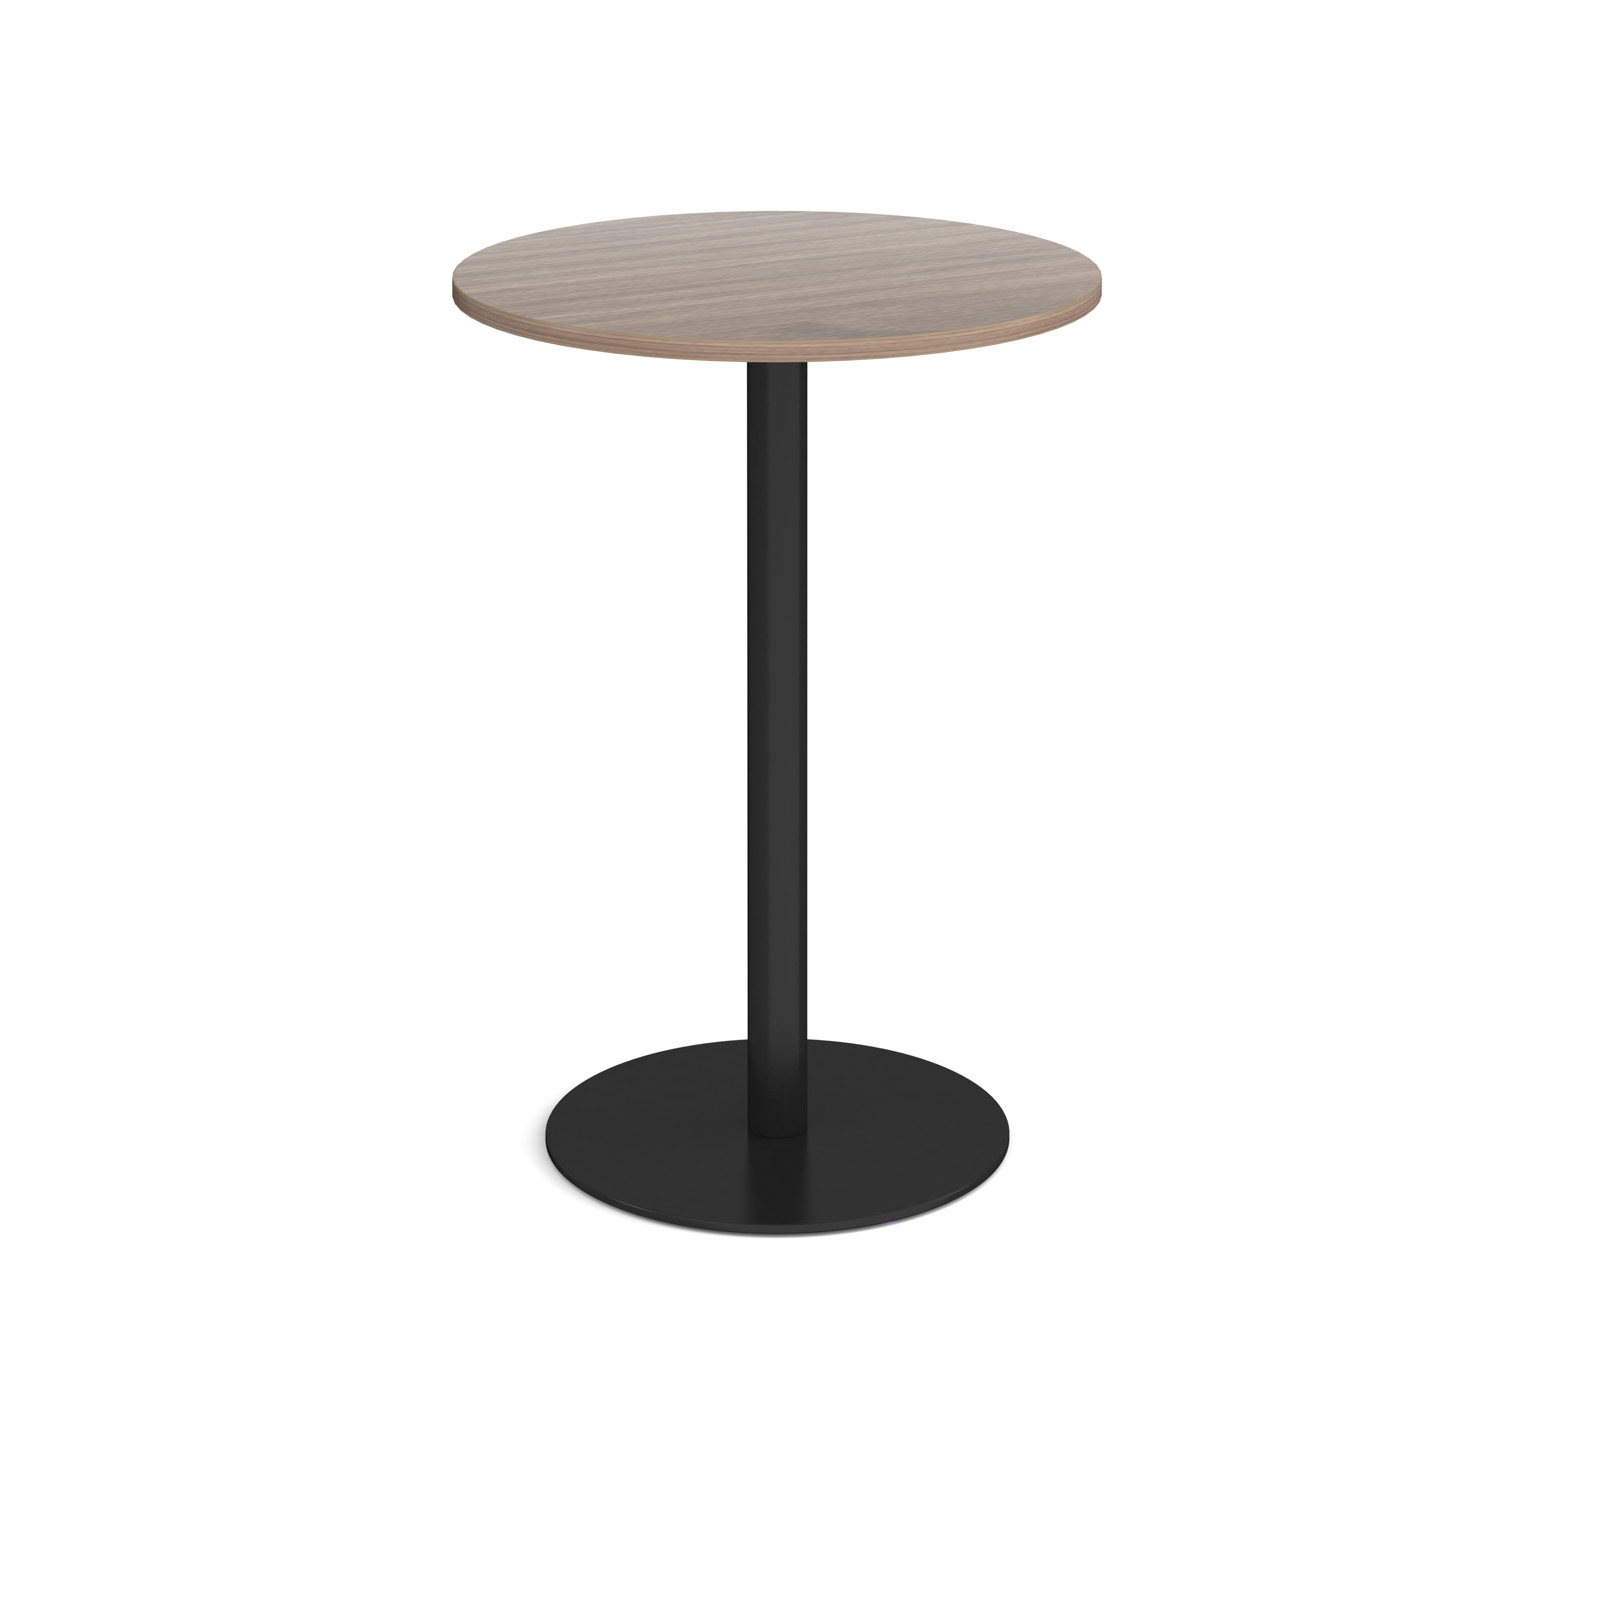 Monza Circular Poseur Table with Flat Round Base